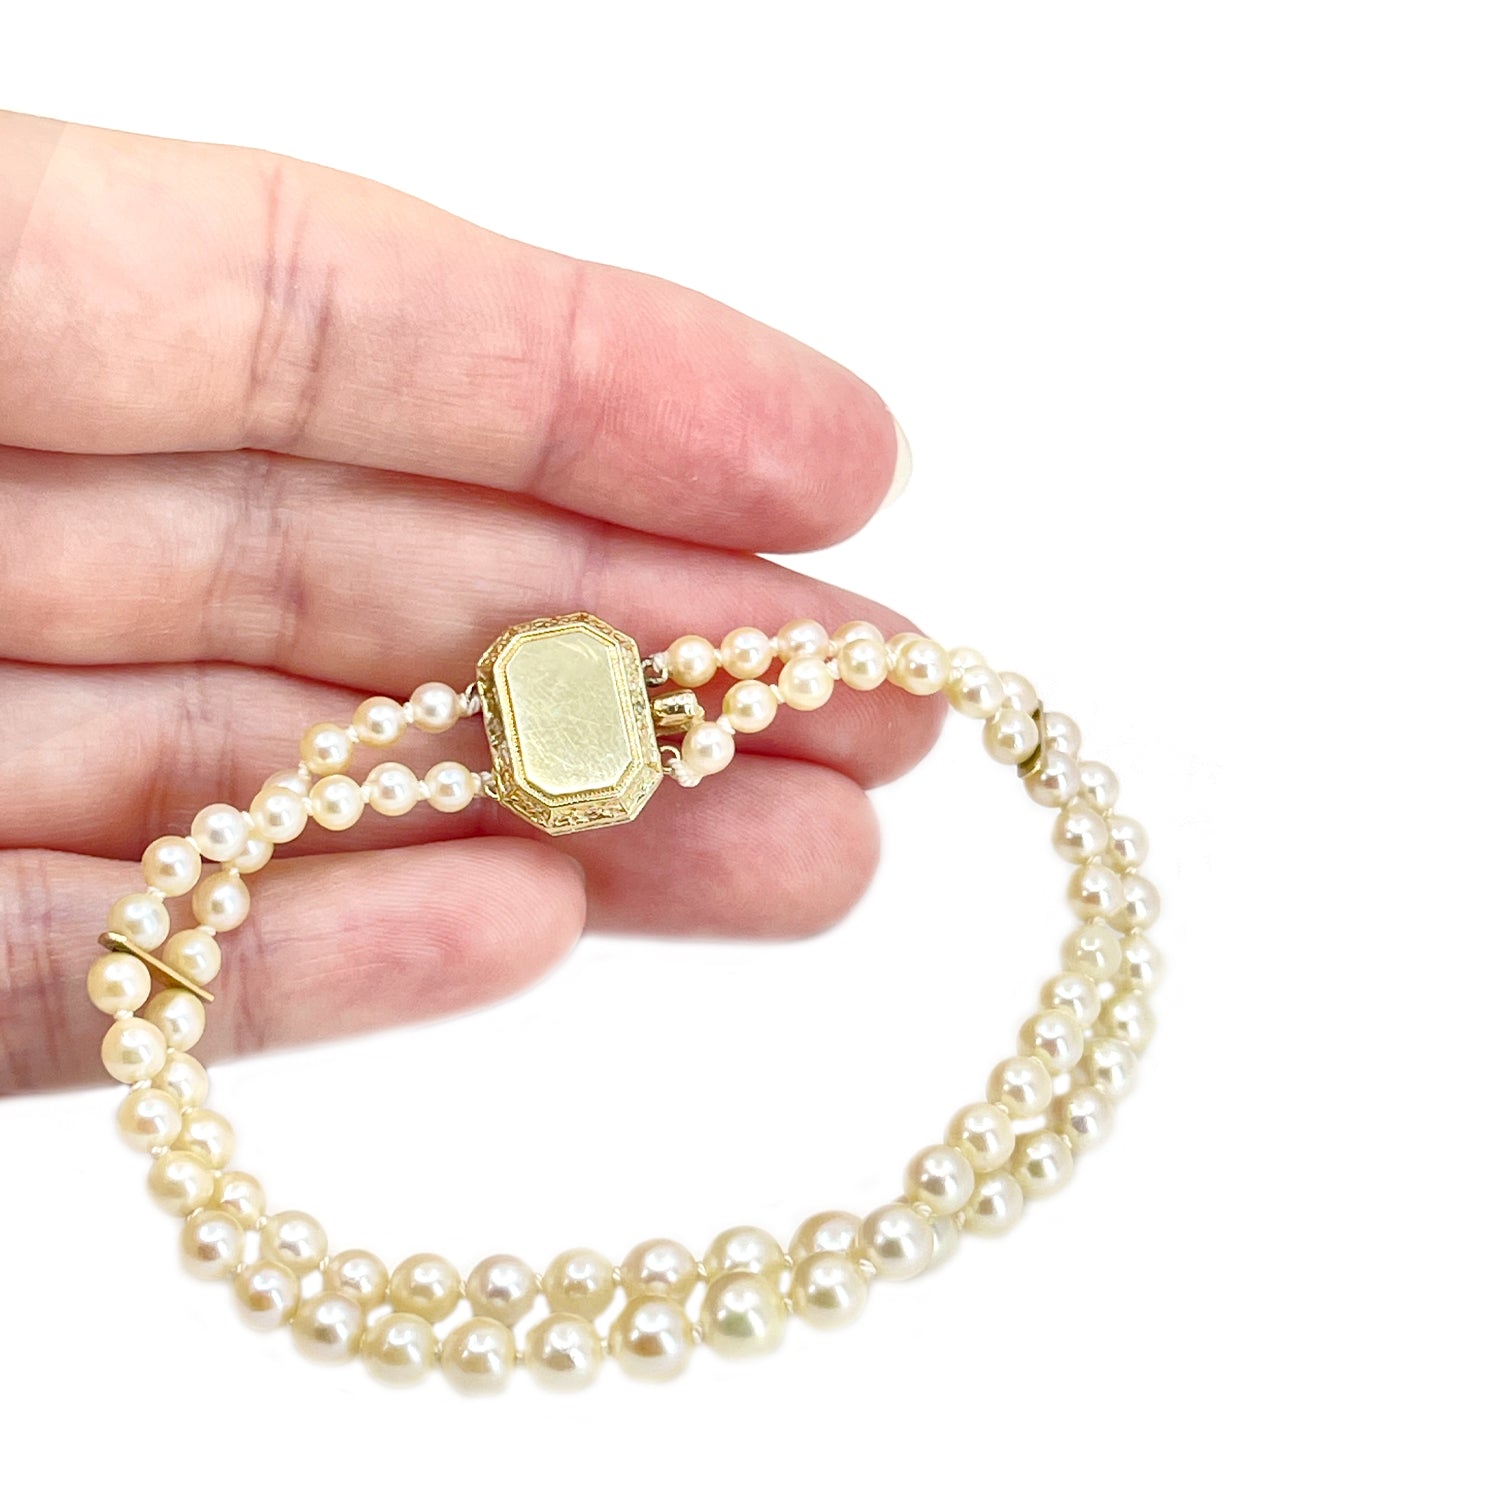 Victorian Double Strand Antique Akoya Saltwater Cultured Pearl Bracelet- 14K Yellow Gold